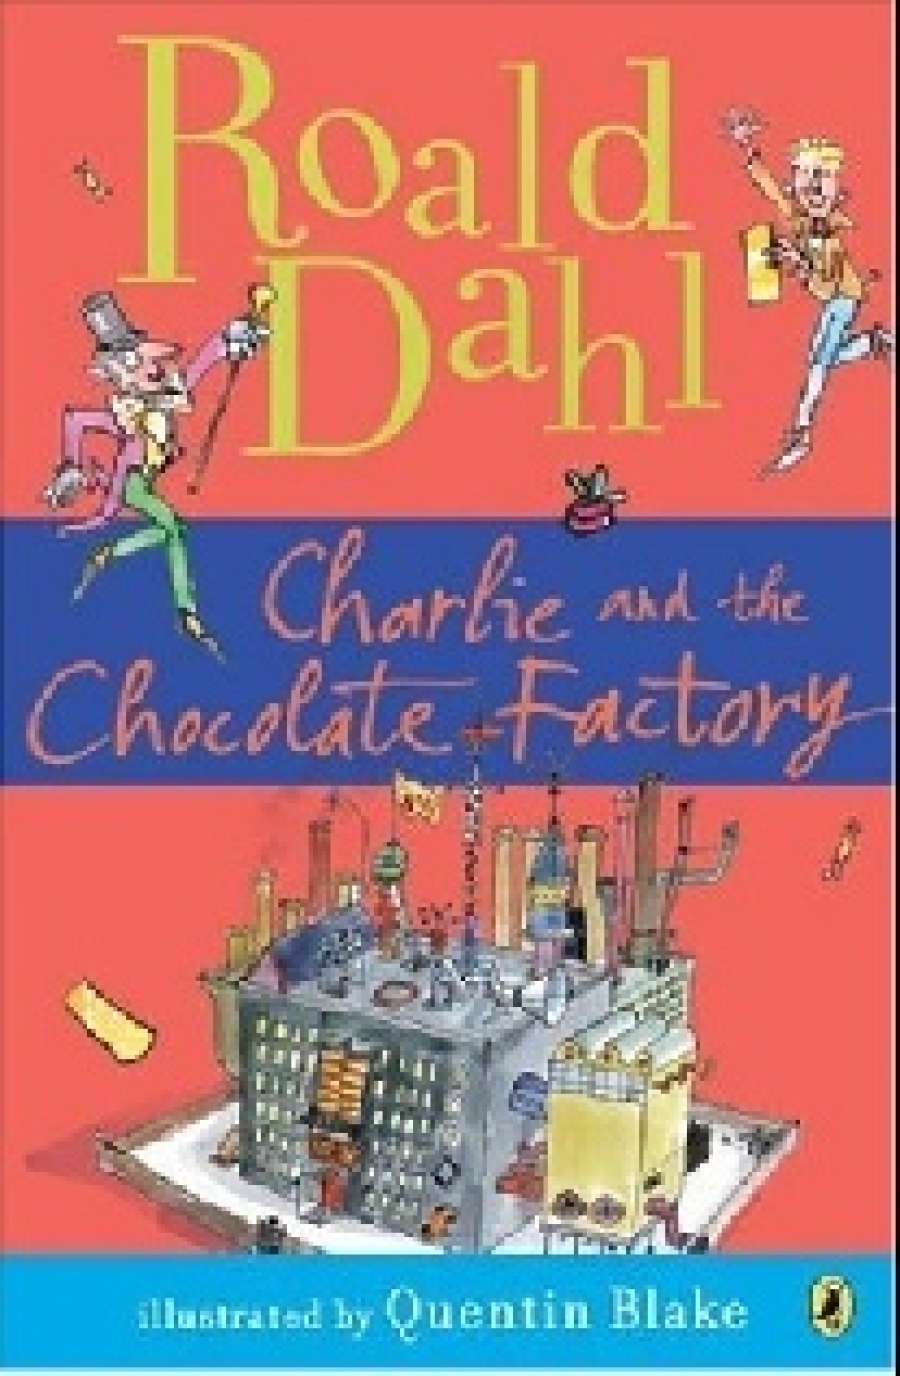 Dahl Roald Charlie and the Chocolate Factory 